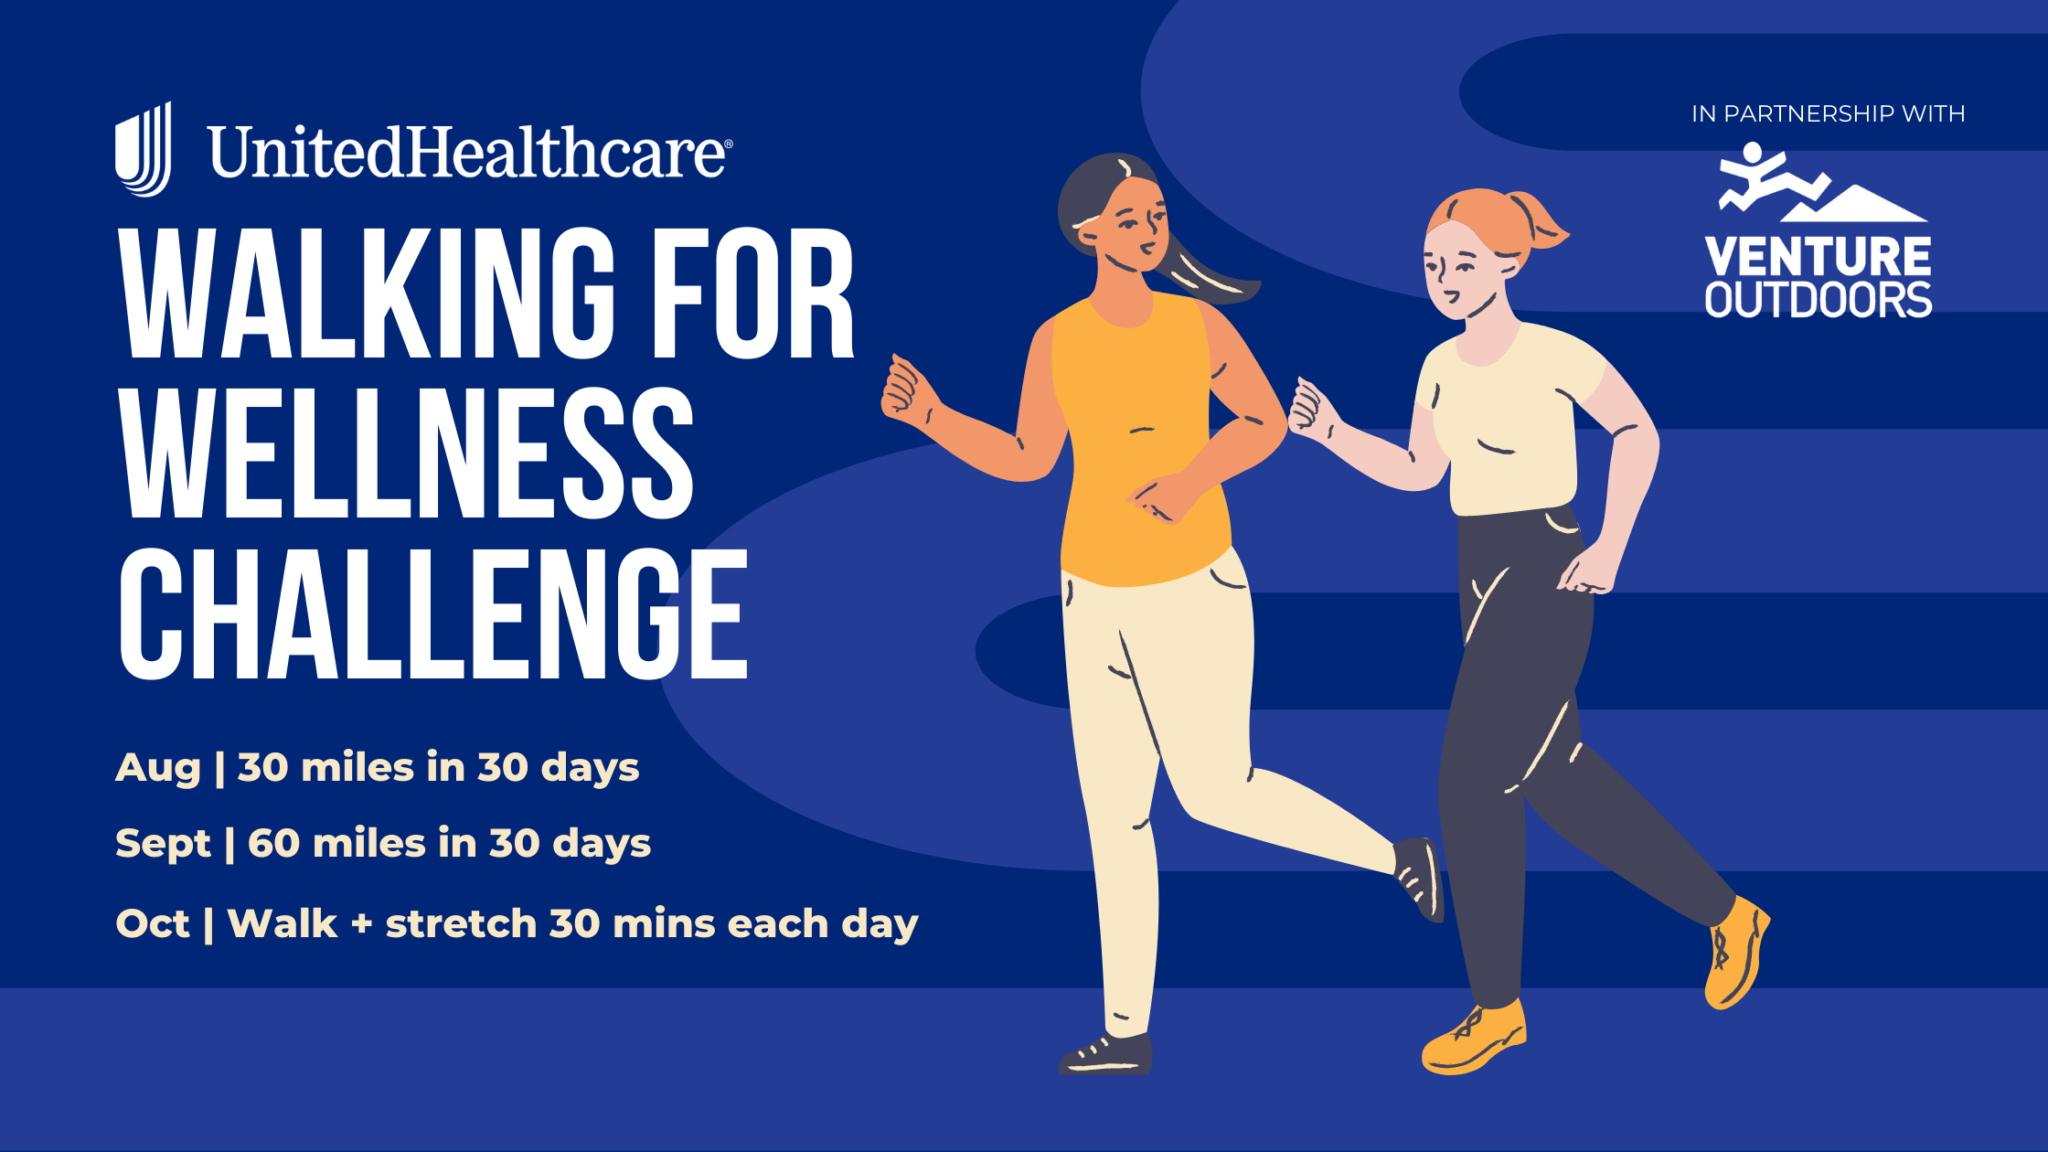 Join the 3 Month UnitedHealthcare Walking for Wellness Challenge